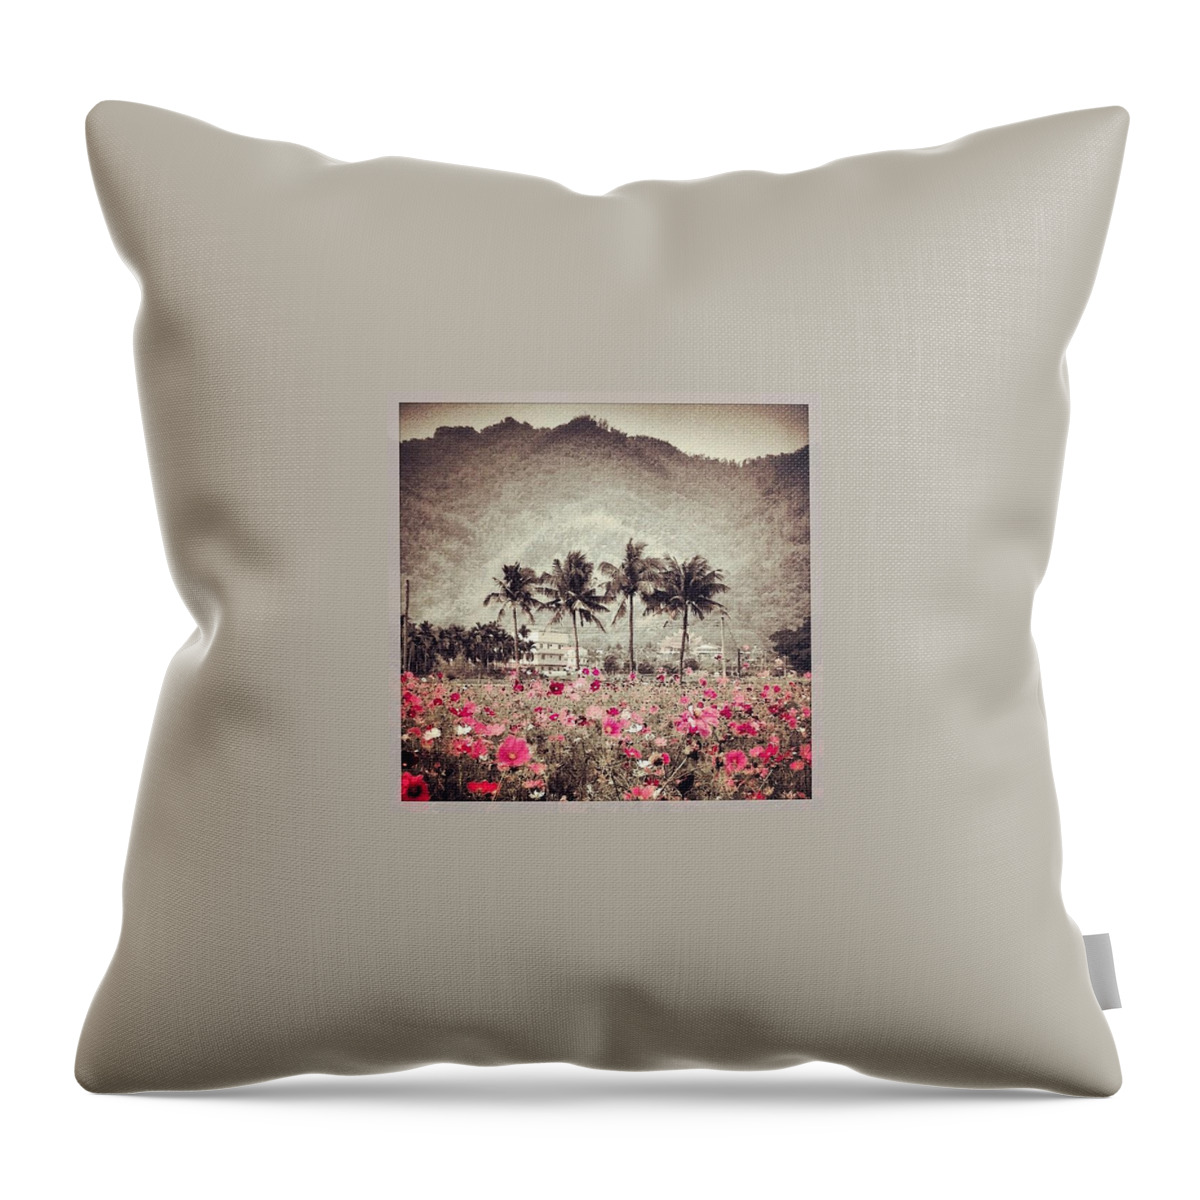 Palmtrees Throw Pillow featuring the photograph Pink And Black by Ashley Irwin